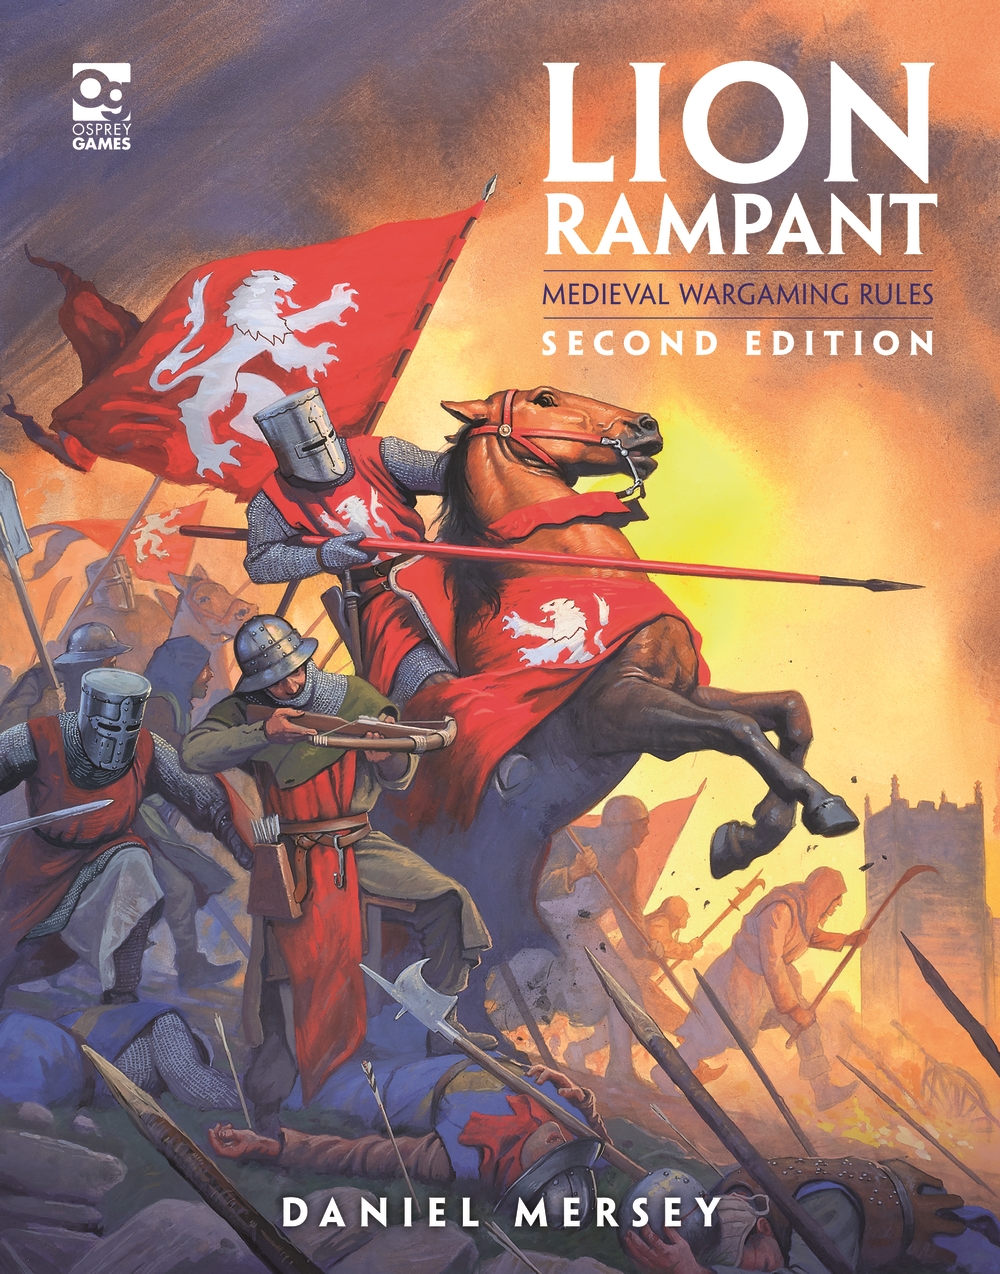 Lion Rampant: Second Edition cover art